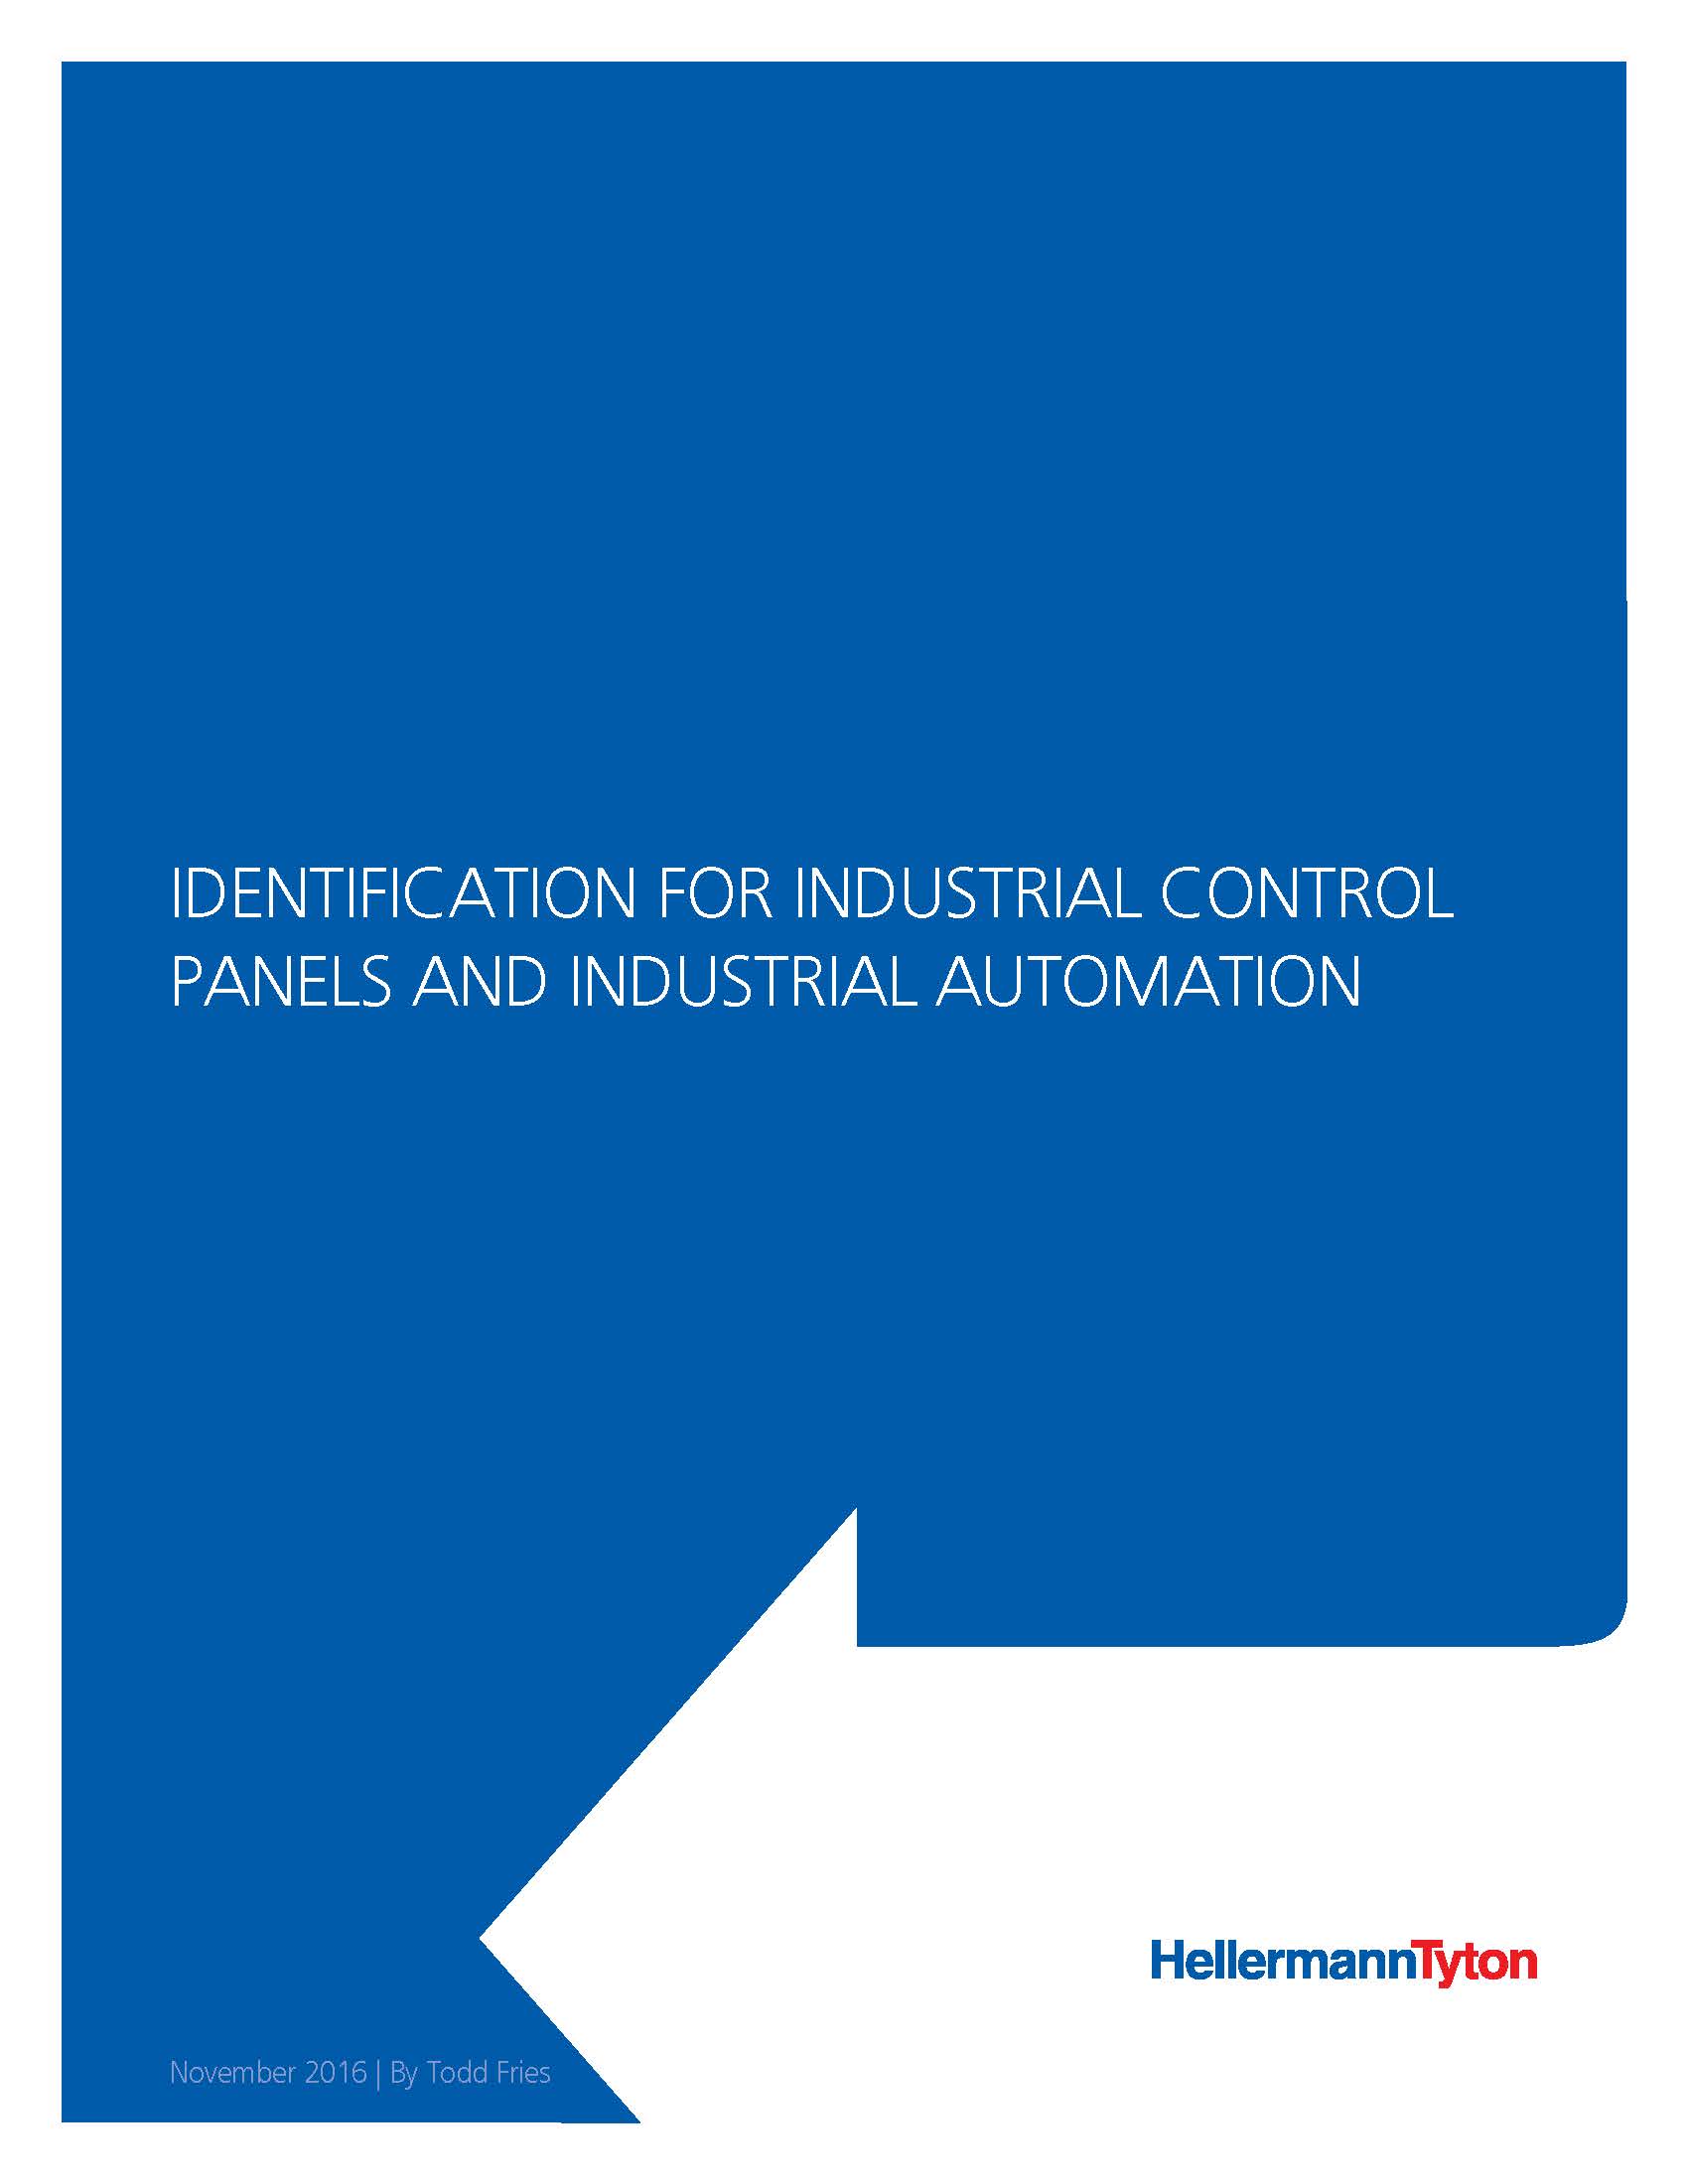 ID for Industrial Control Panel & Automation